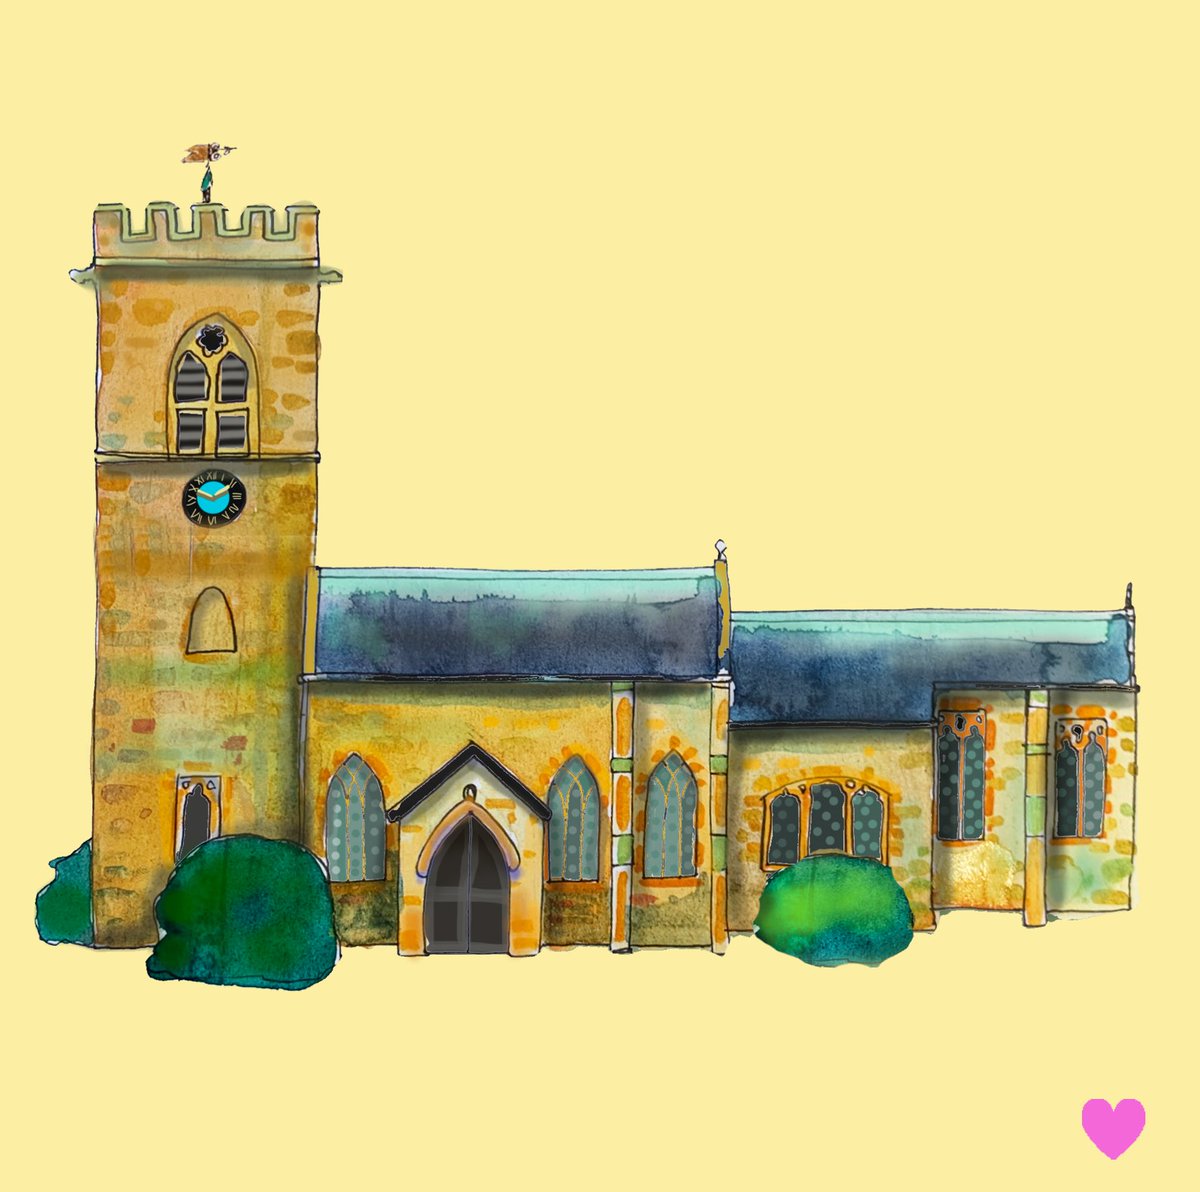 Another landmark - this is our 350th building: the church in Abington Park, St Peter’s & St Paul’s. Northamptonshire stone is just so beautiful. ❤️ #requested